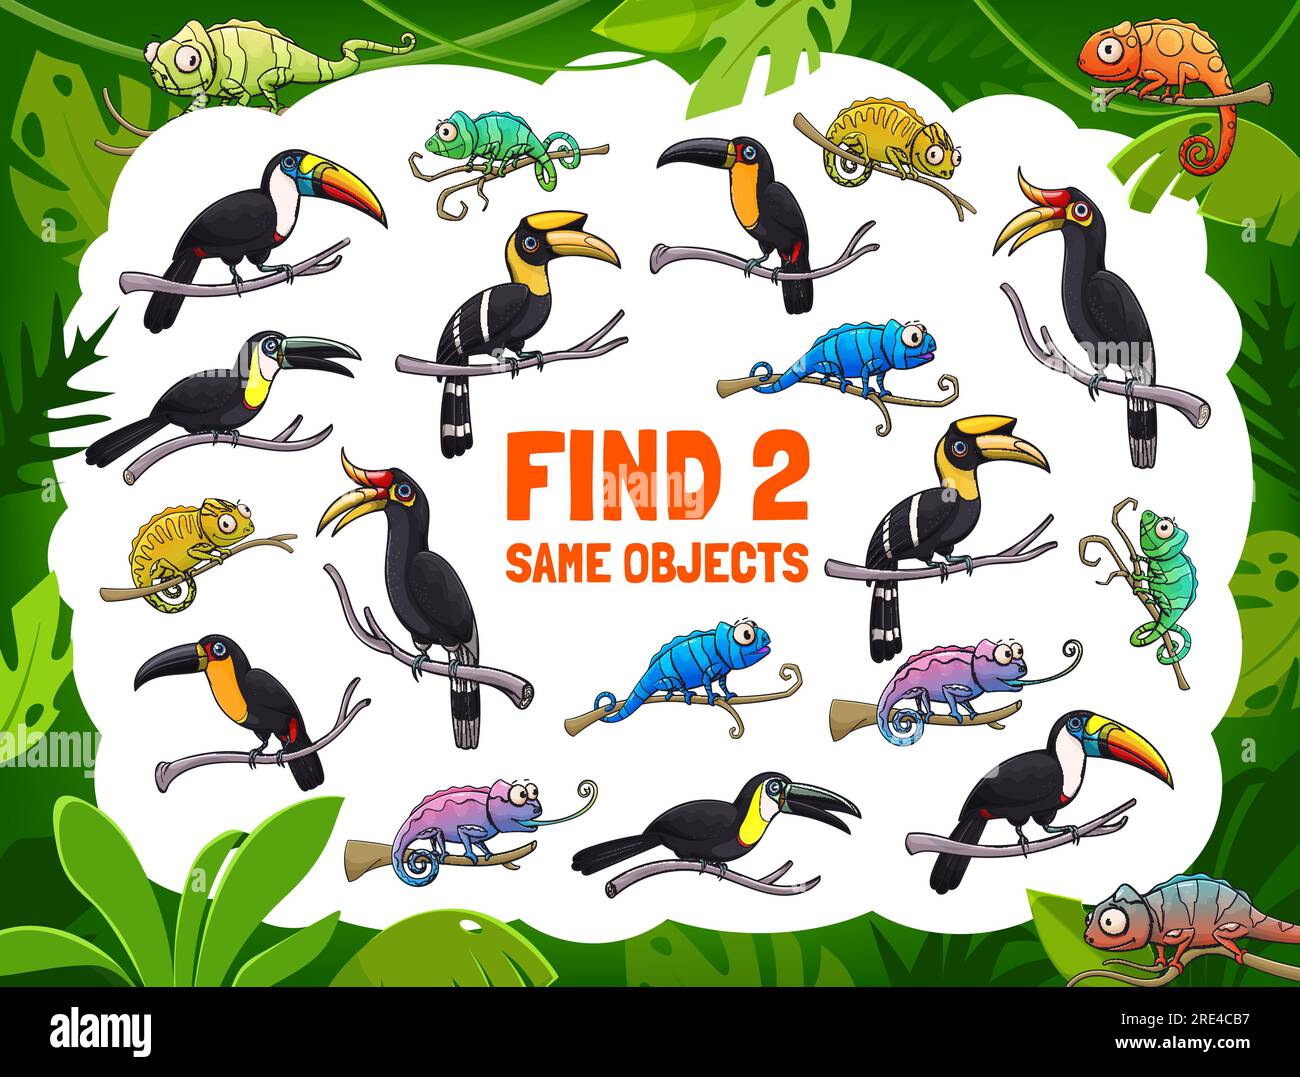 Find two same toucans and chameleons, kids game or tabletop riddle, vector. Find correct match of tropical birds and exotic reptiles in jungle palms, kids cartoon board game puzzle Stock Vector